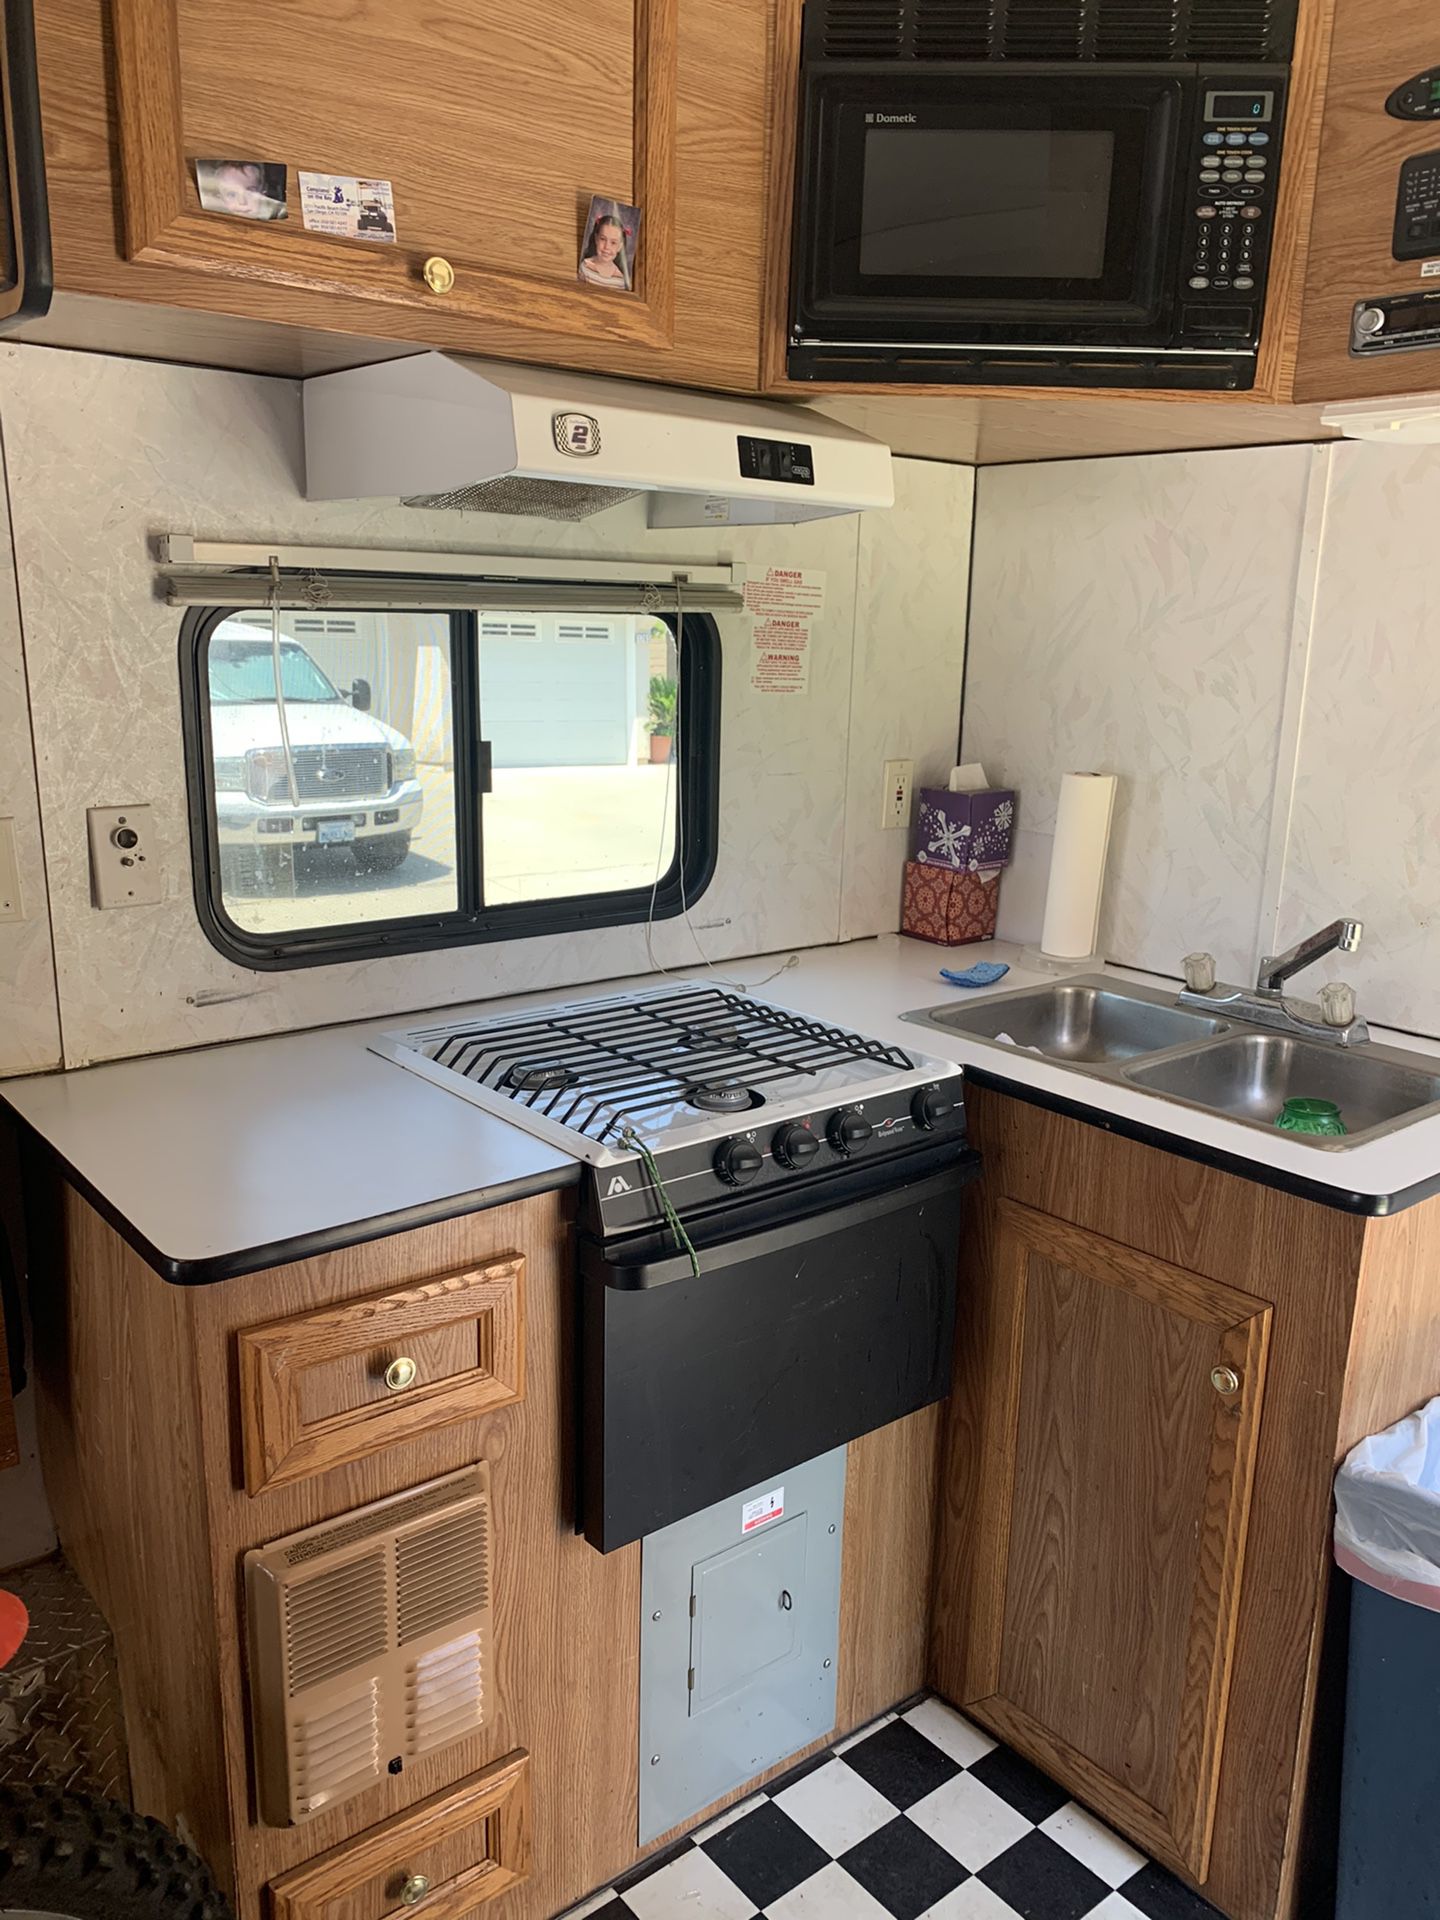 2003 Carerra By Carson 30 Ft Toy Hauler For Sale In Anaheim Ca Offerup